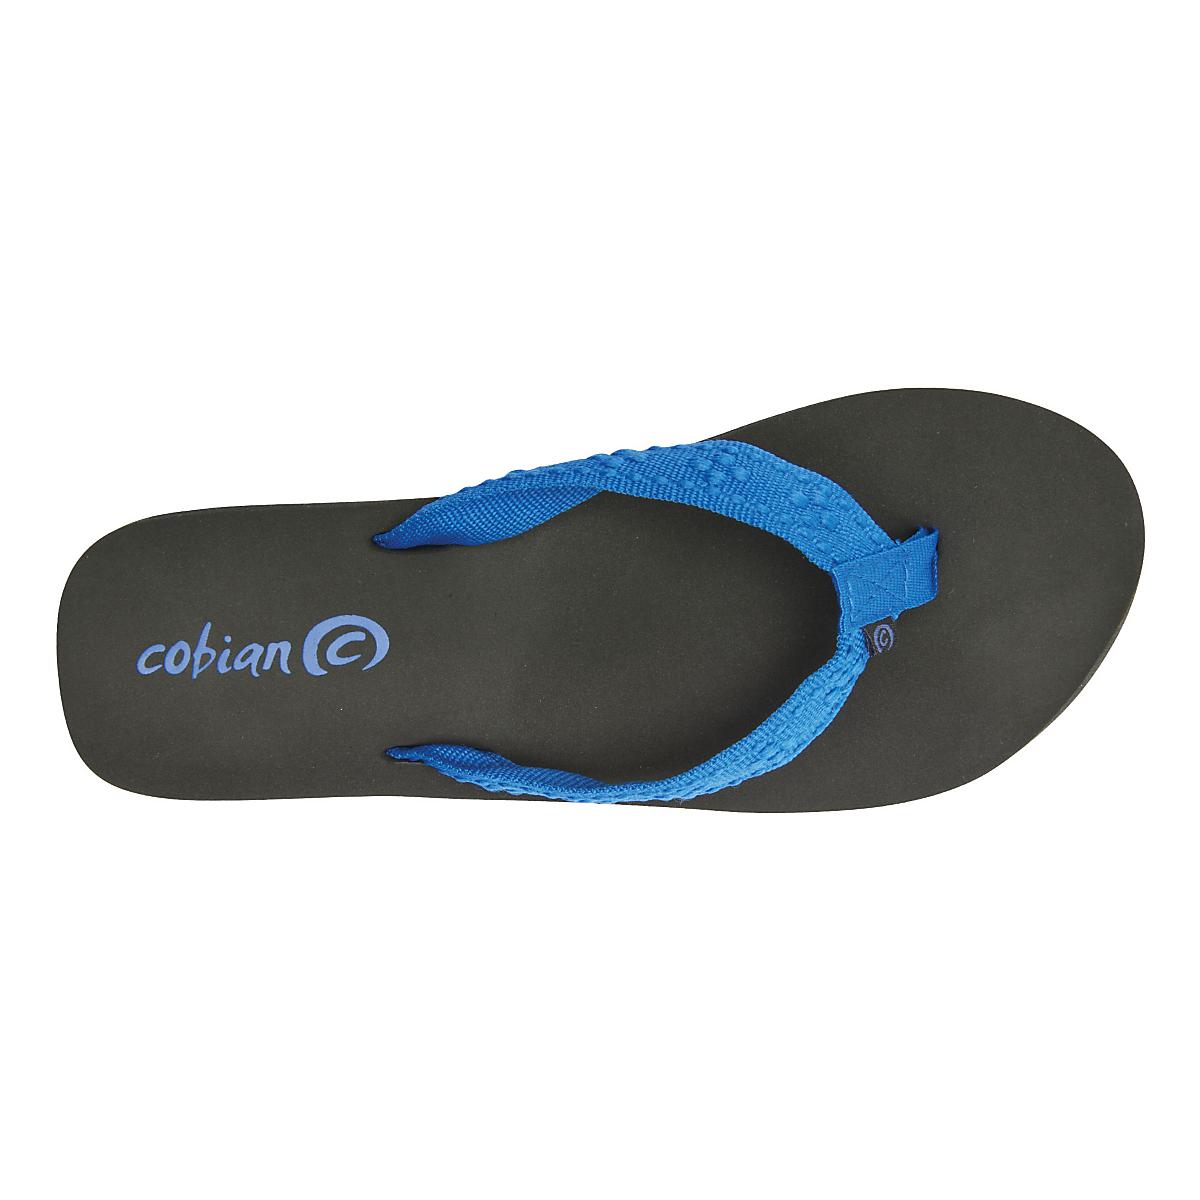 Womens Cobian Bounce Sandals Shoe at Road Runner Sports